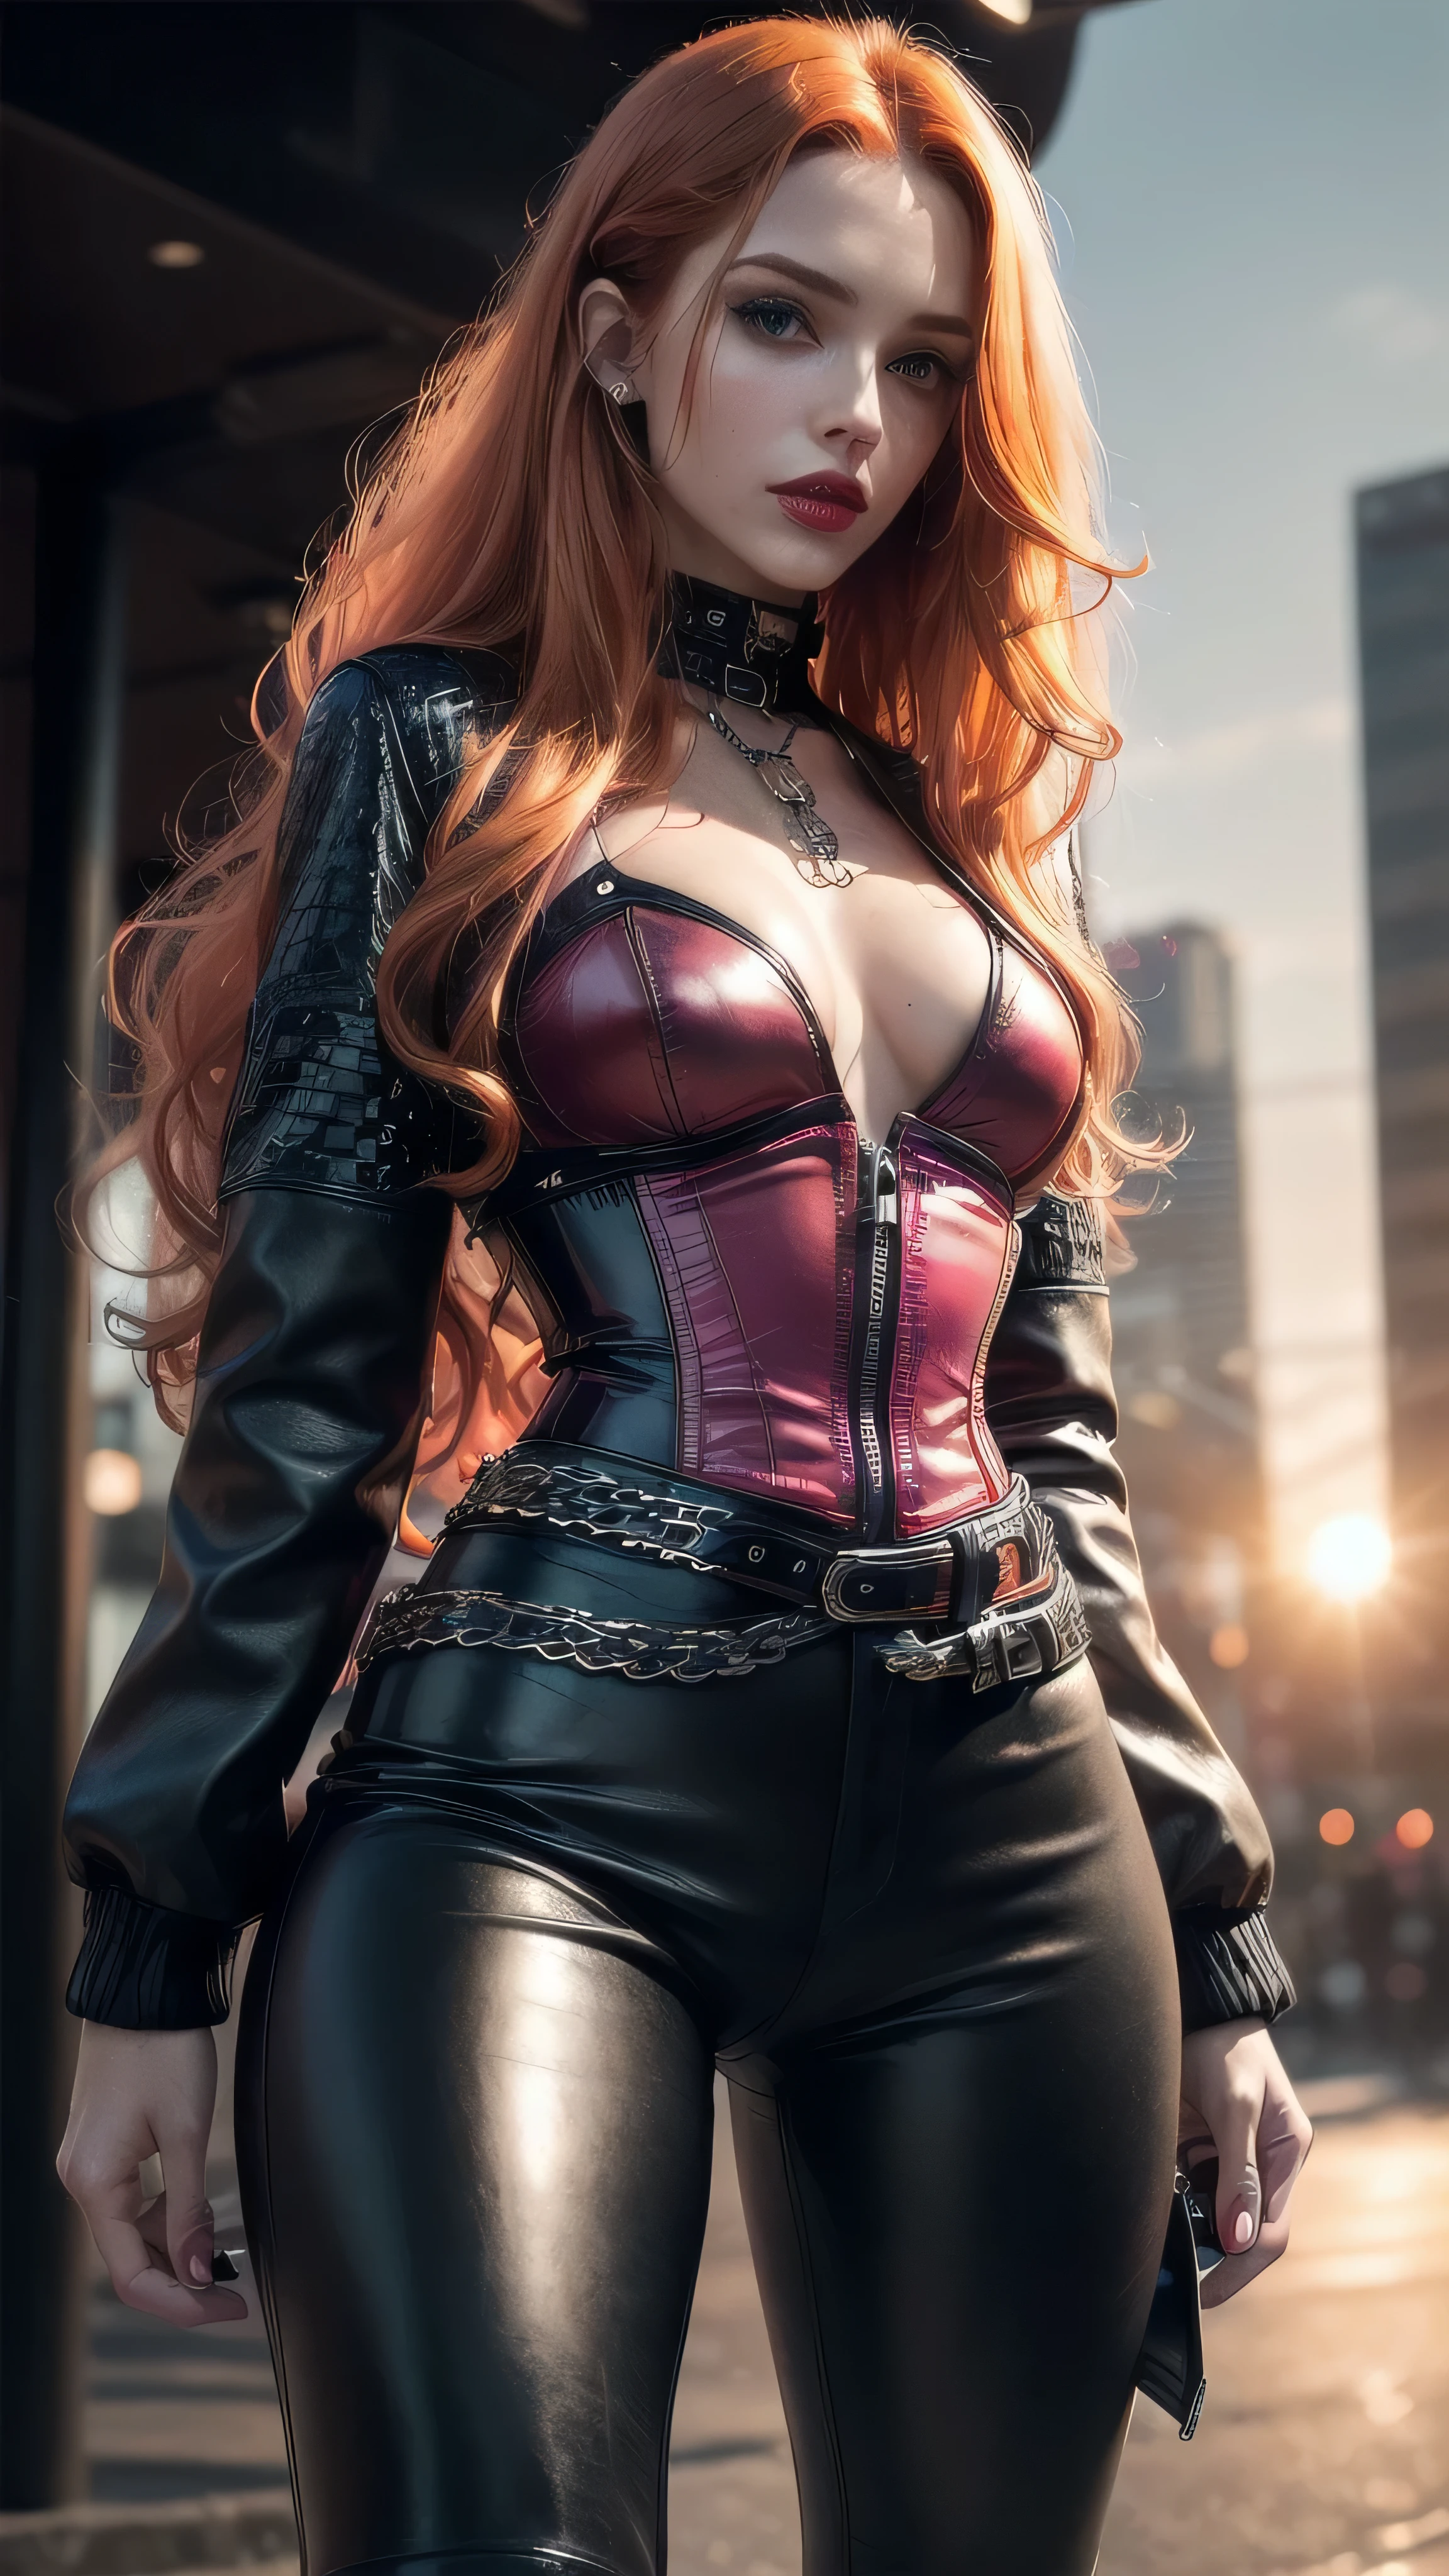 (masterpiece), (extremely intricate:1.3), (realistic), girl, (((long curly [blonde hair:bright ginger hair:0.4], (([flat chest:medium breasts:0.8])), upper body, ((makeup:1.6, leather pants, perfectchainmail black jacket), red lips, bright sunlight, sunset, tattoo:1.4, hotpink silk corset)))), outdoors, metal reflections, ((((futuristic cyberpunk street, dangerous)))), professional photograph, soft focus, dramatic, award winning, cinematic lighting, volumetrics dtx, (film grain, blurry background, blurry foreground, bokeh, depth of field), 8K